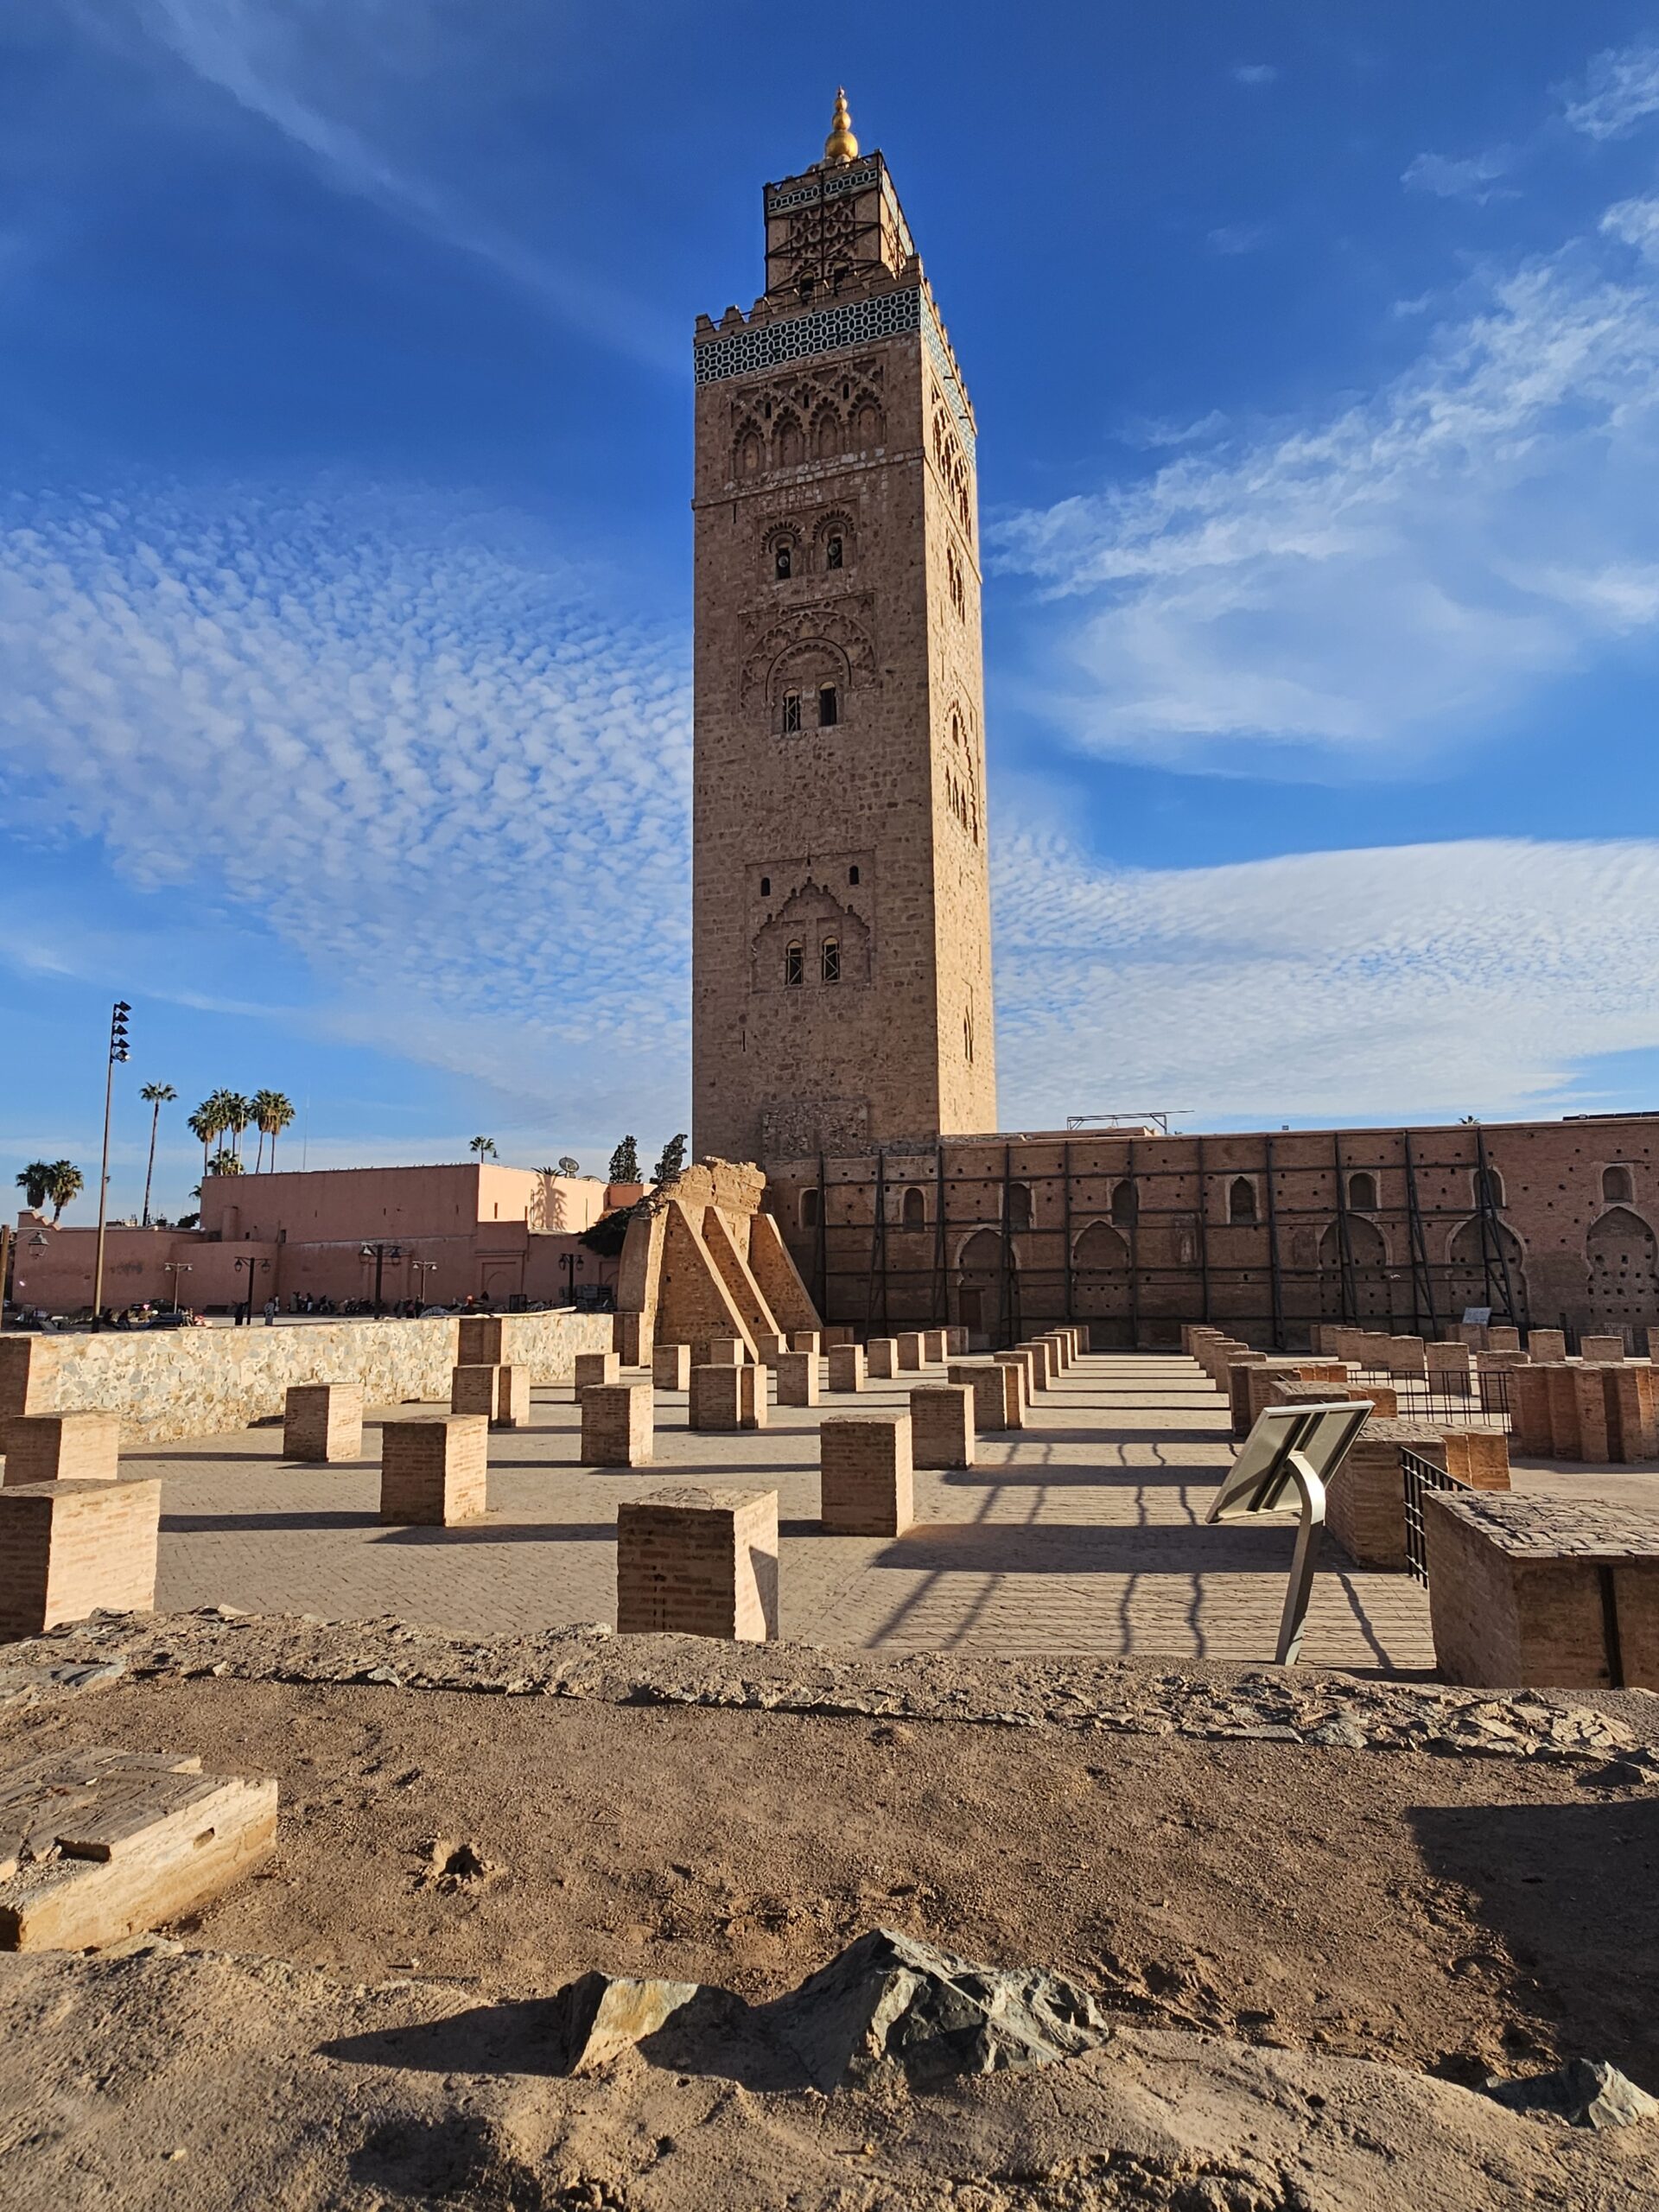 The 12th century Koutoubia Mosque and its front yard with pillars, Marrakesh. Image by 360onhistory.com